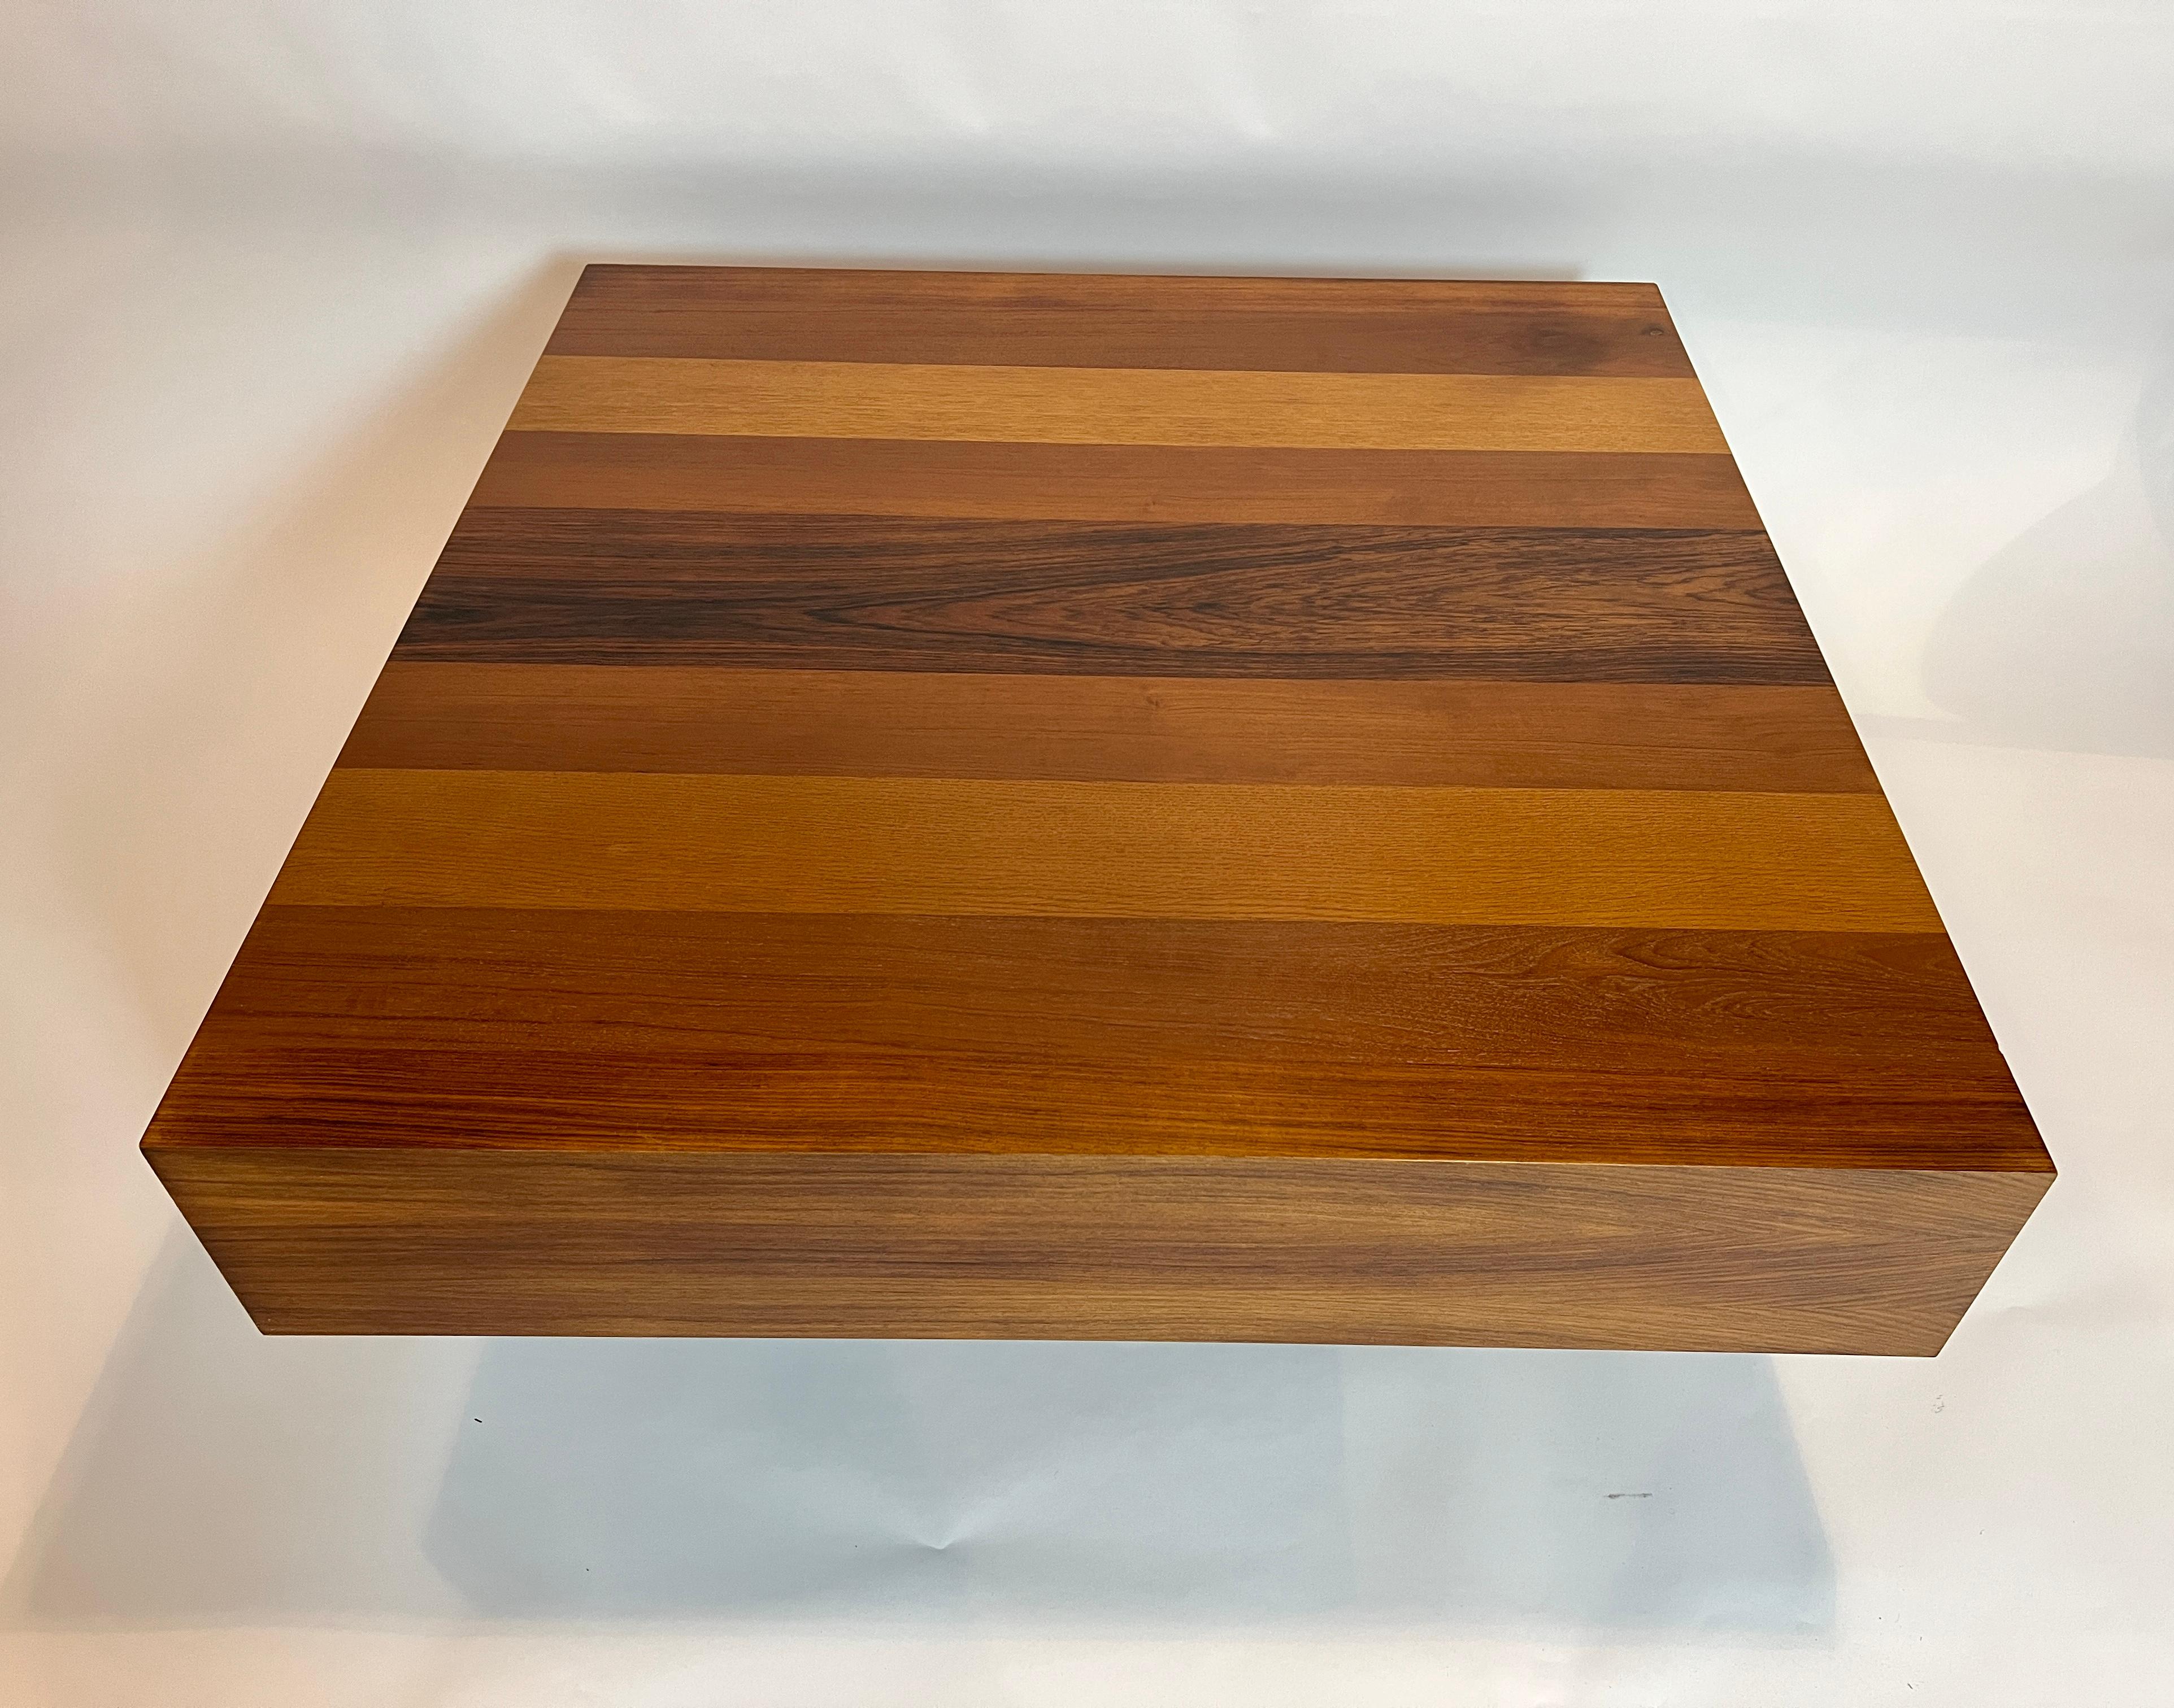 20th Century Danish Modern Mixed Wood Square Coffee Table by Drylund